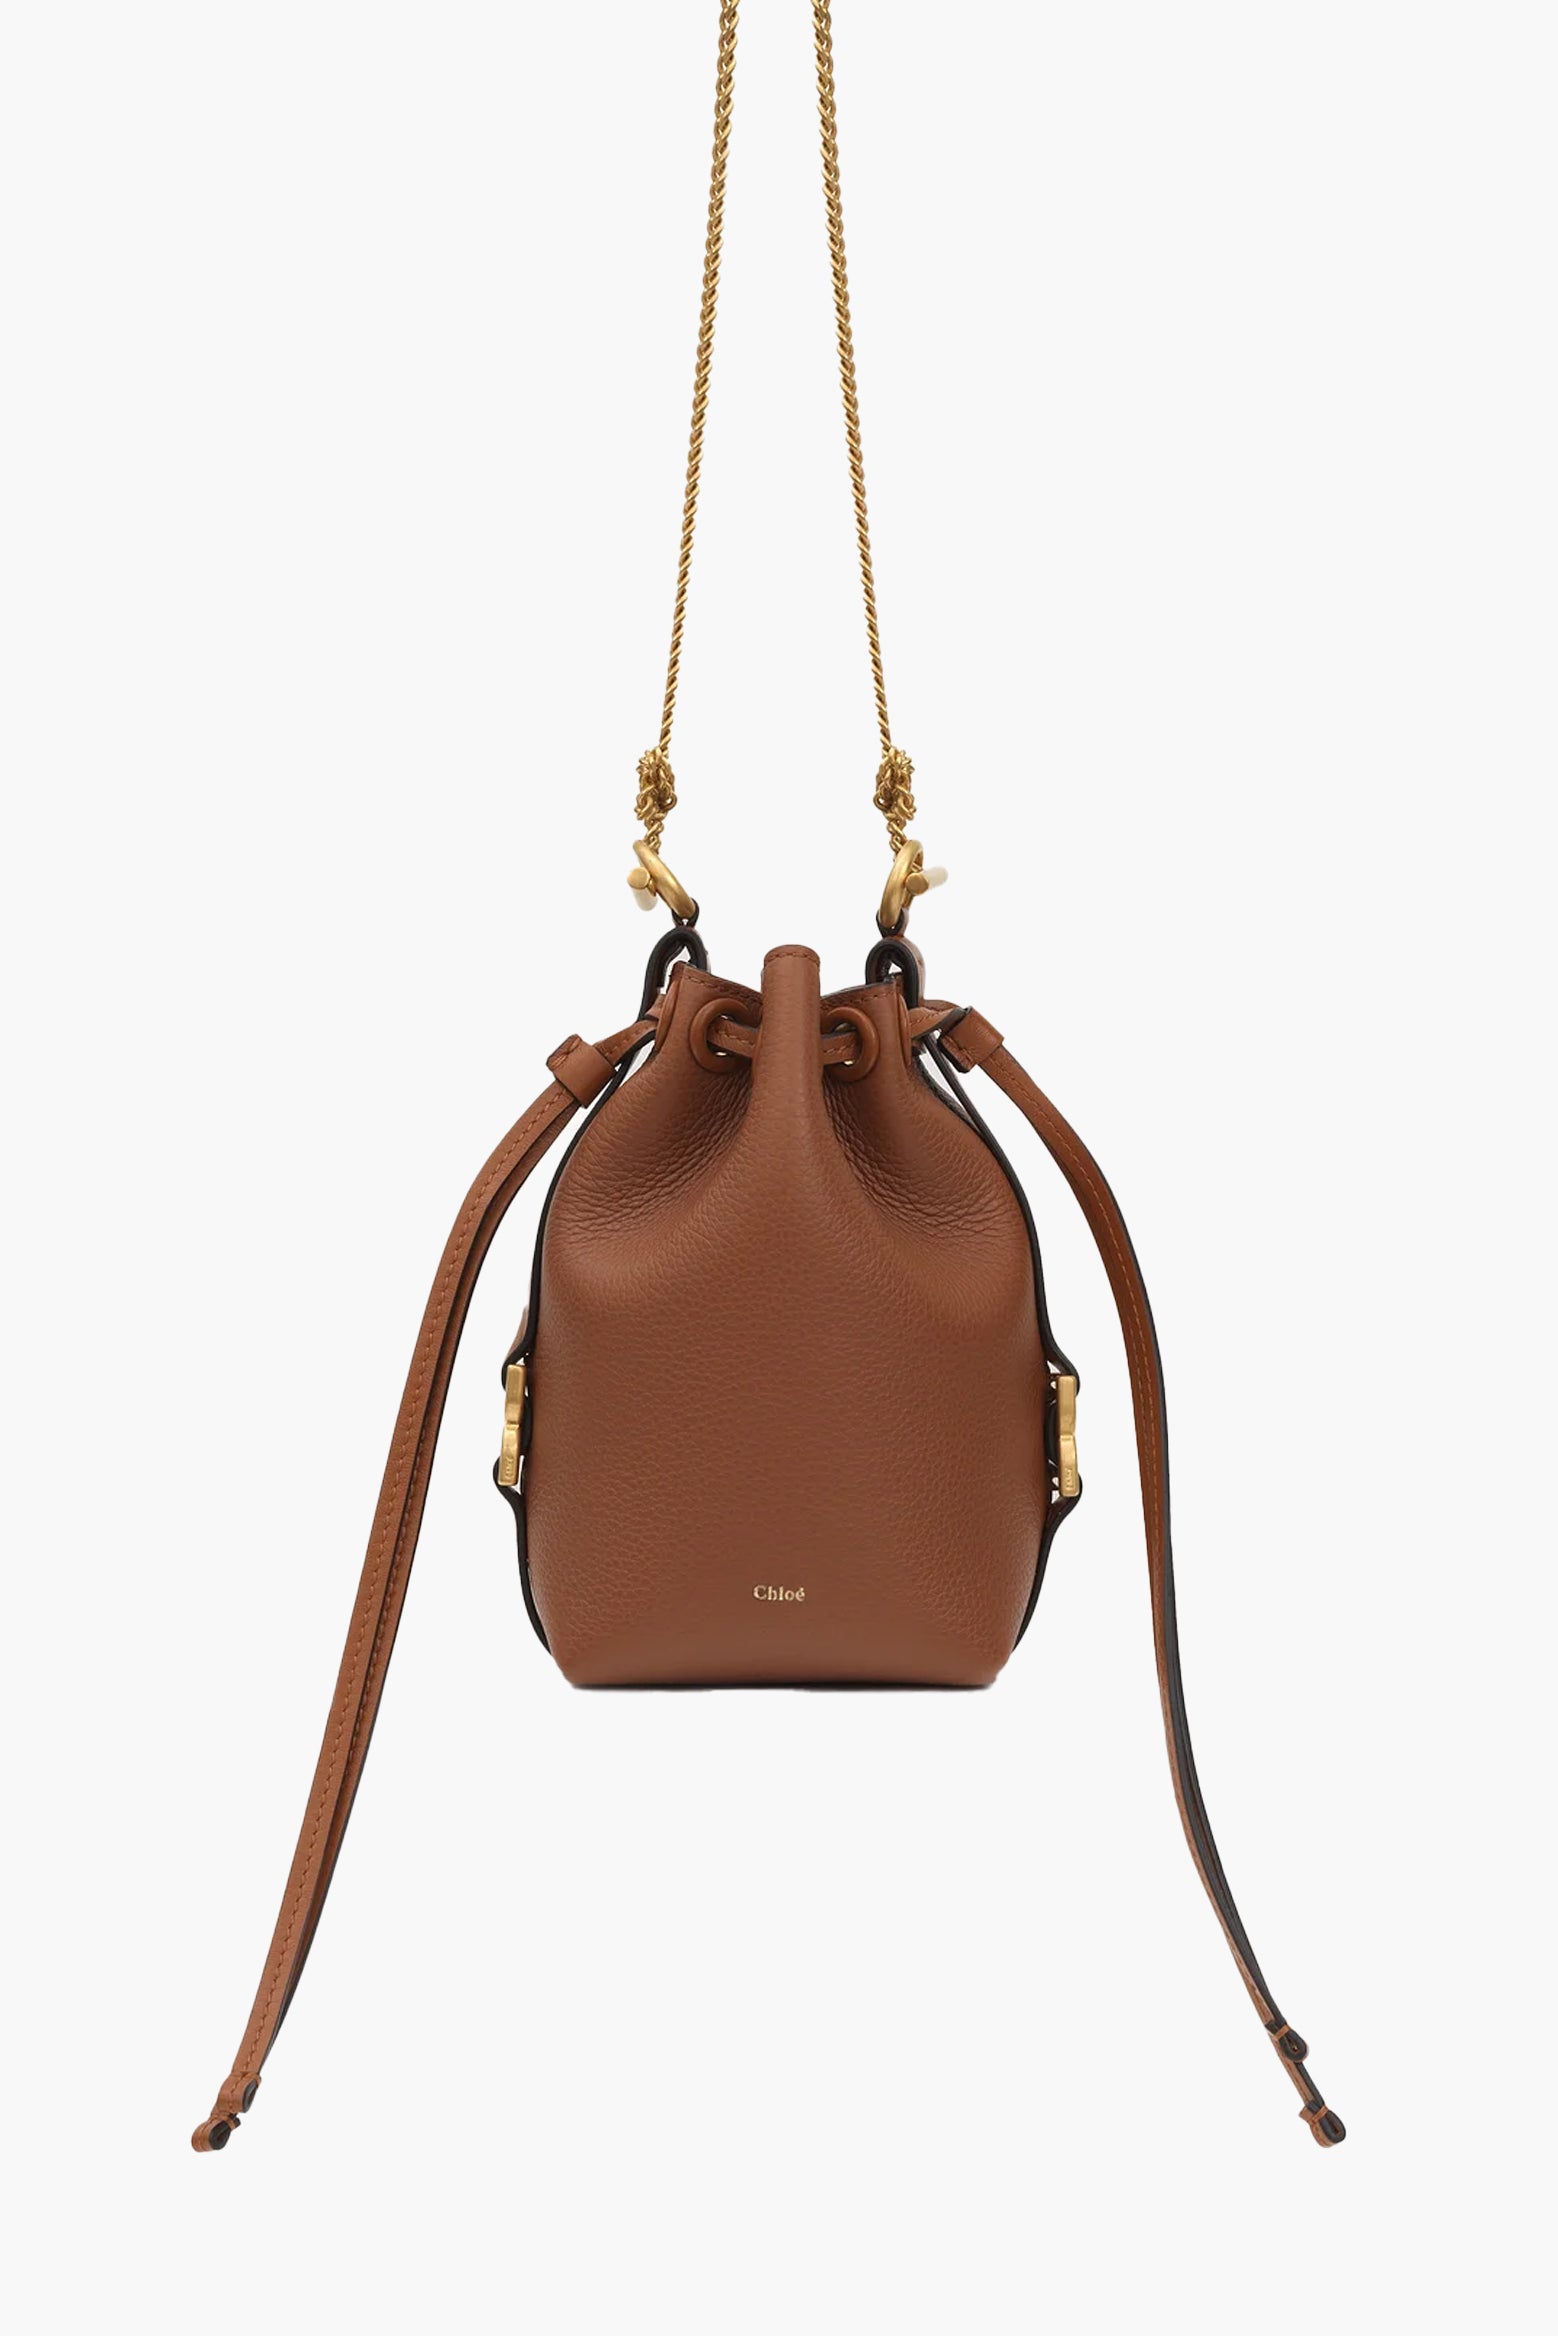 Chloé Marcie Micro Bucket Bag in Tan available at The New Trend Australia.